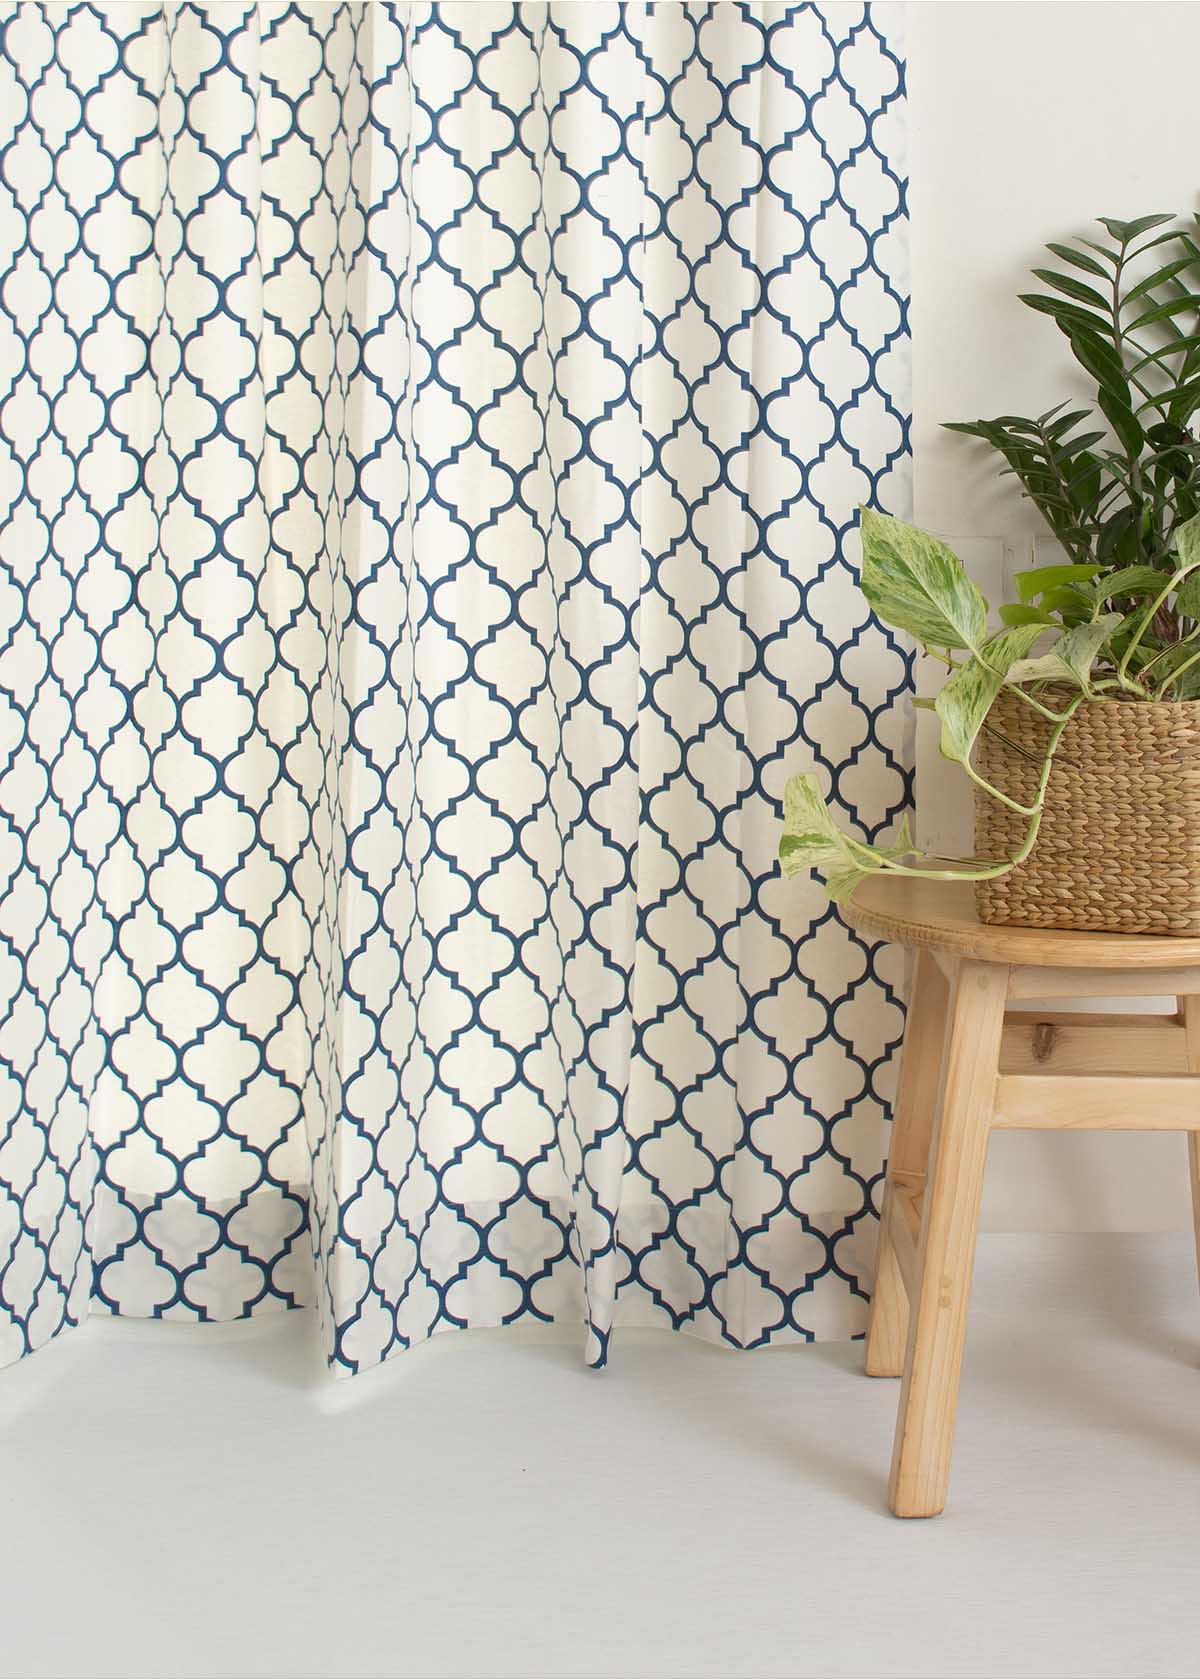 Trellis Printed 100% cotton geometric curtain for bed room - Room darkening - Royal Blue - Pack of 1